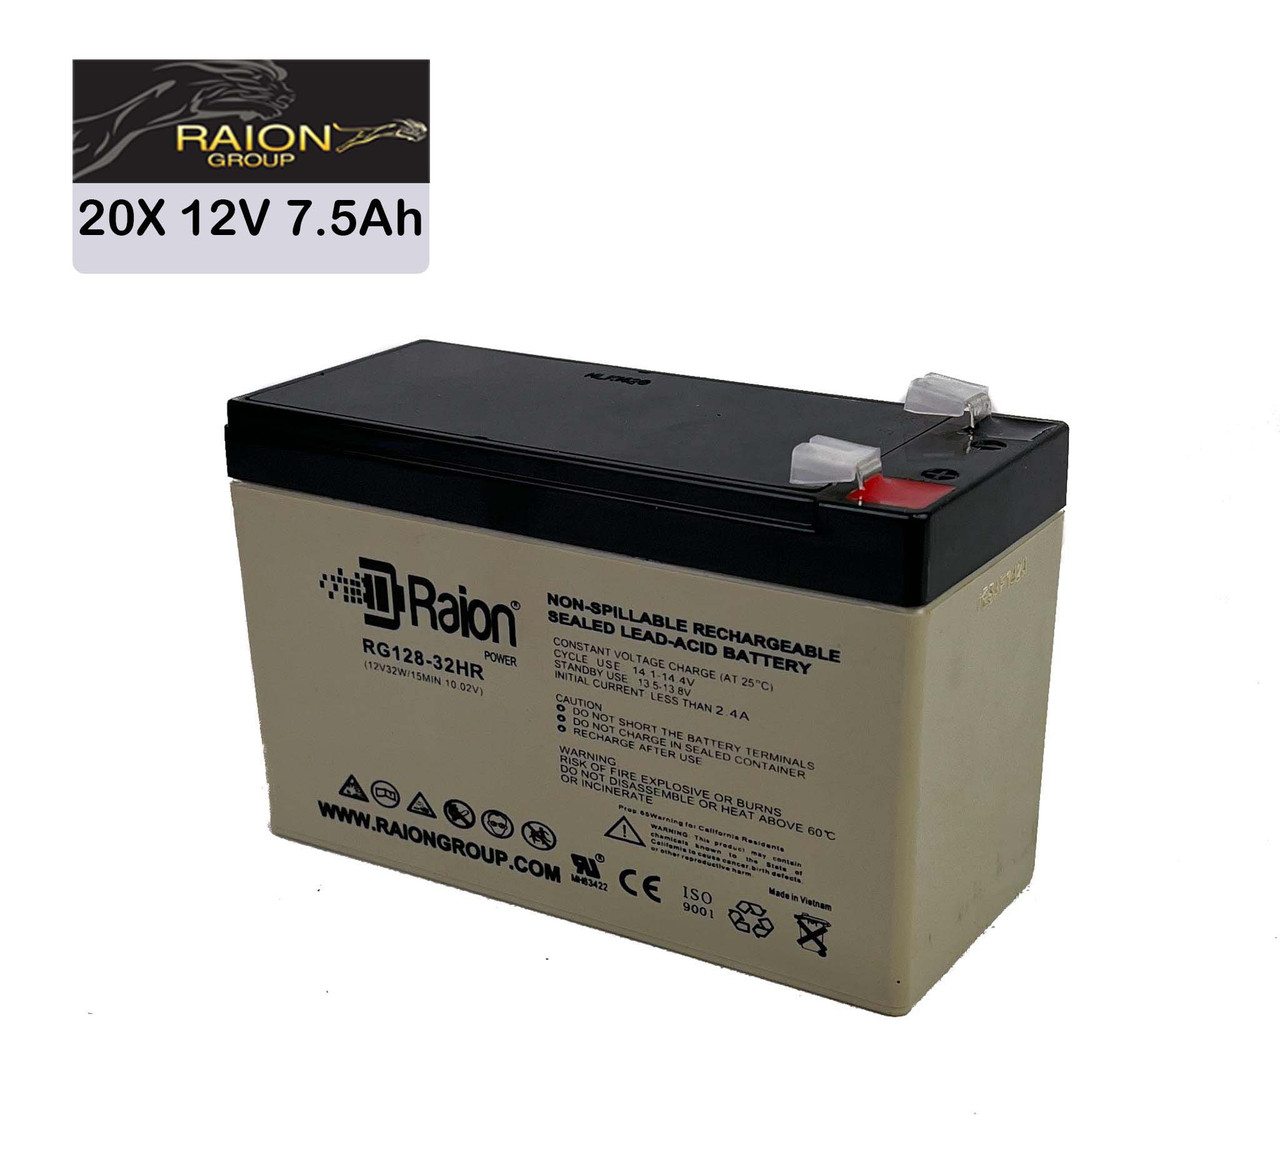 Raion Power 12V 7.5Ah High Rate Discharge UPS Batteries for MGE EXRT EXB 11k VA - 20 Pack